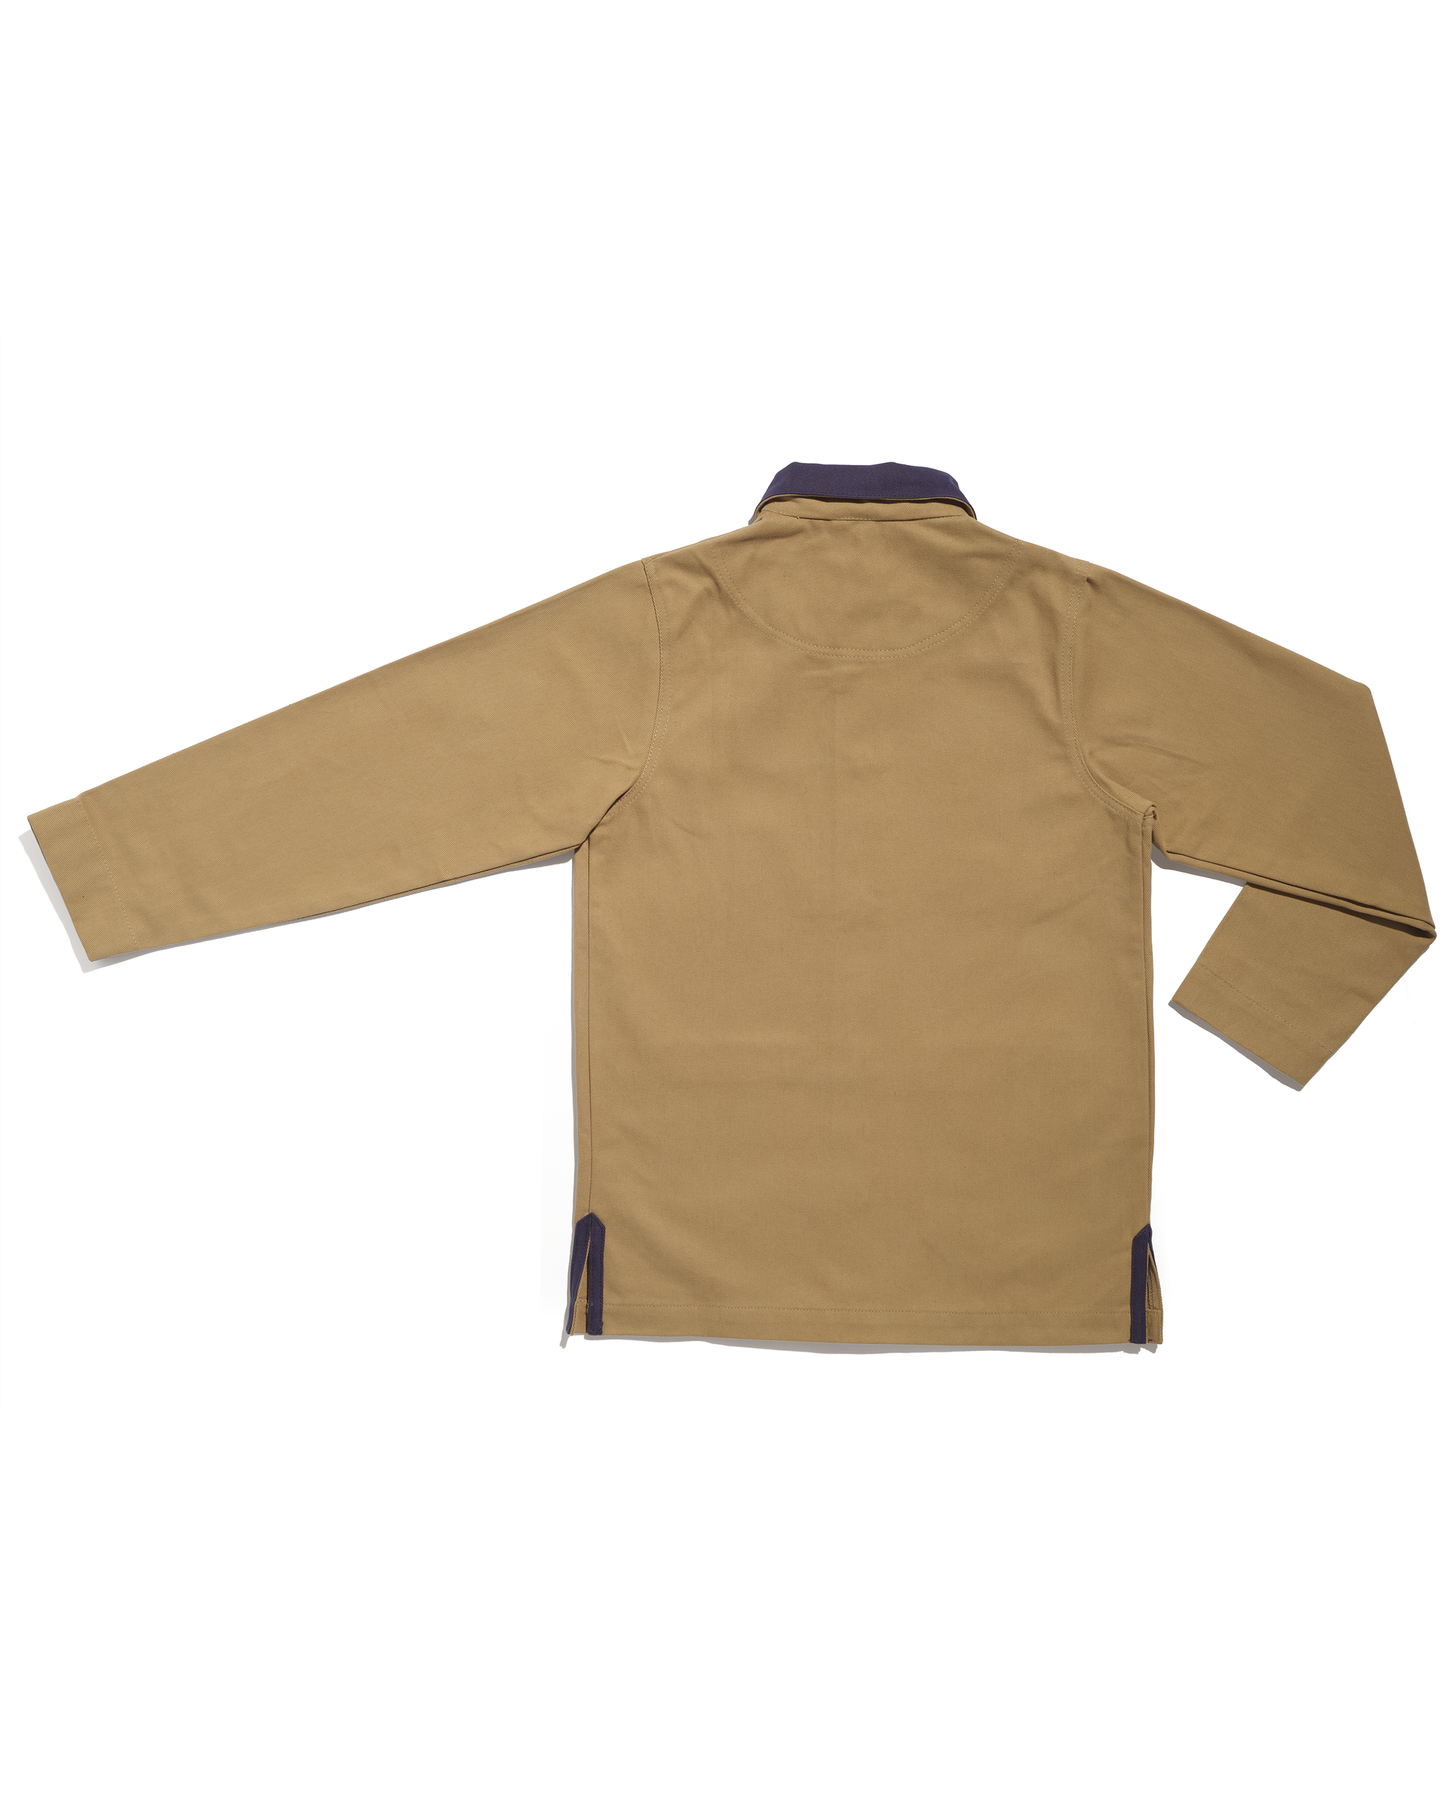 Blue collar thick cotton gardening jacket (limited series)